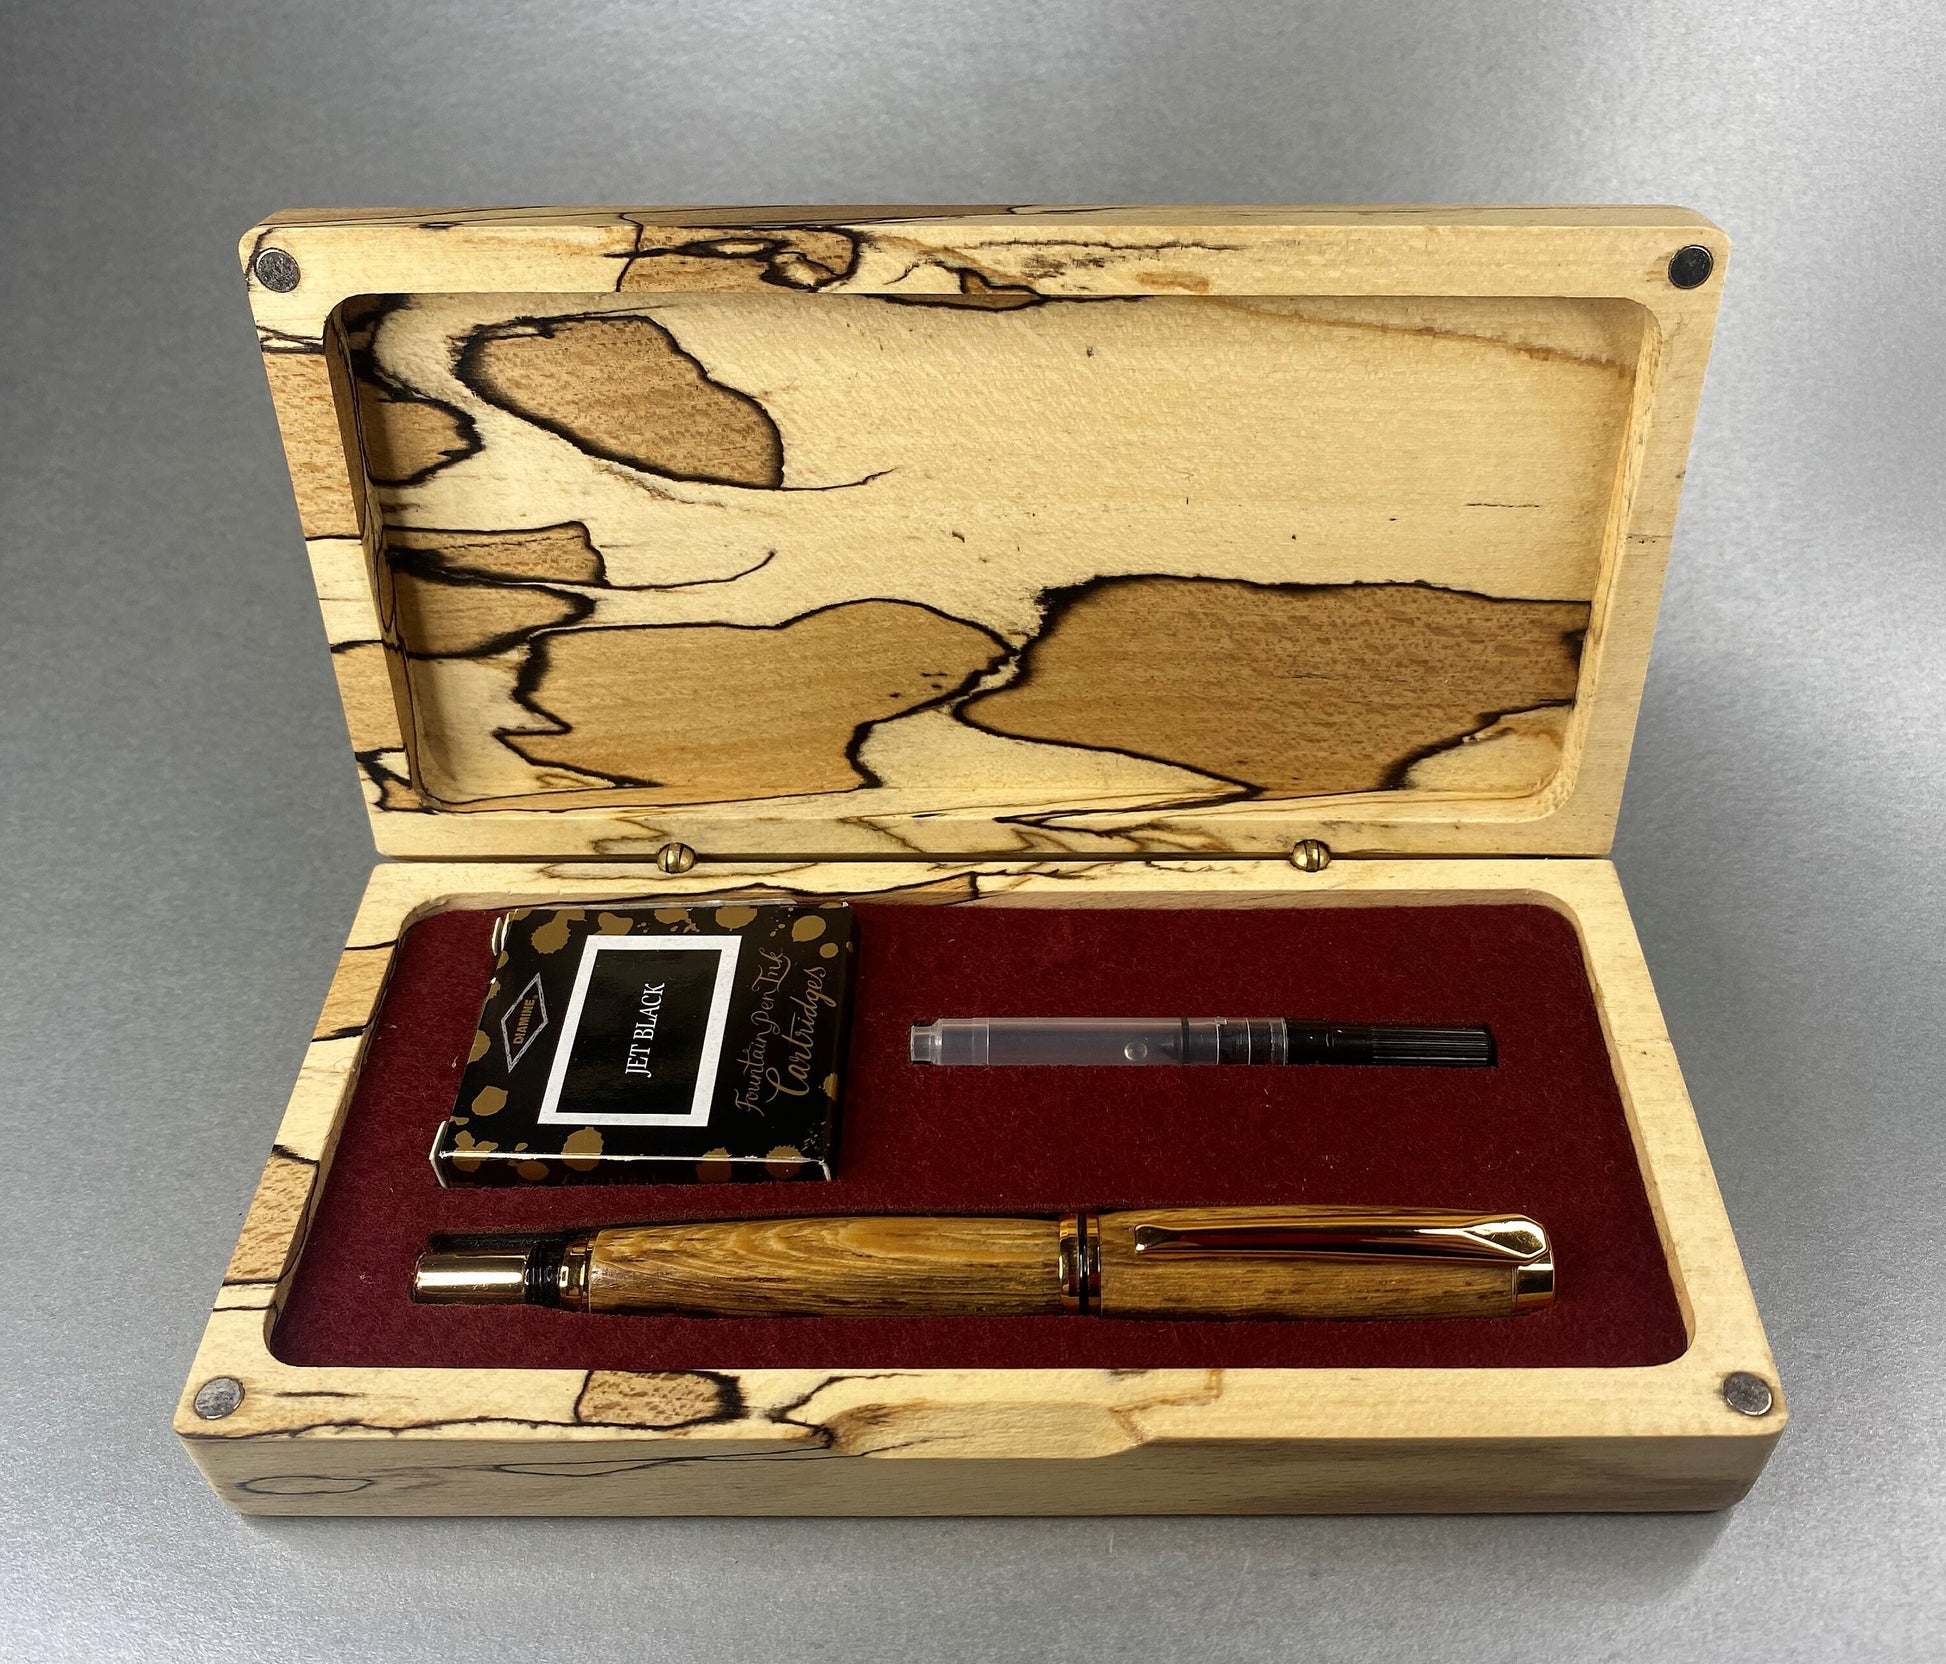 Spalted Beech wood hand crafted presentation box with its lid open showing one hand turned hand crafted pen made from Panga Panga Wood, It has Gold Plated fittings and black accents on the nib.